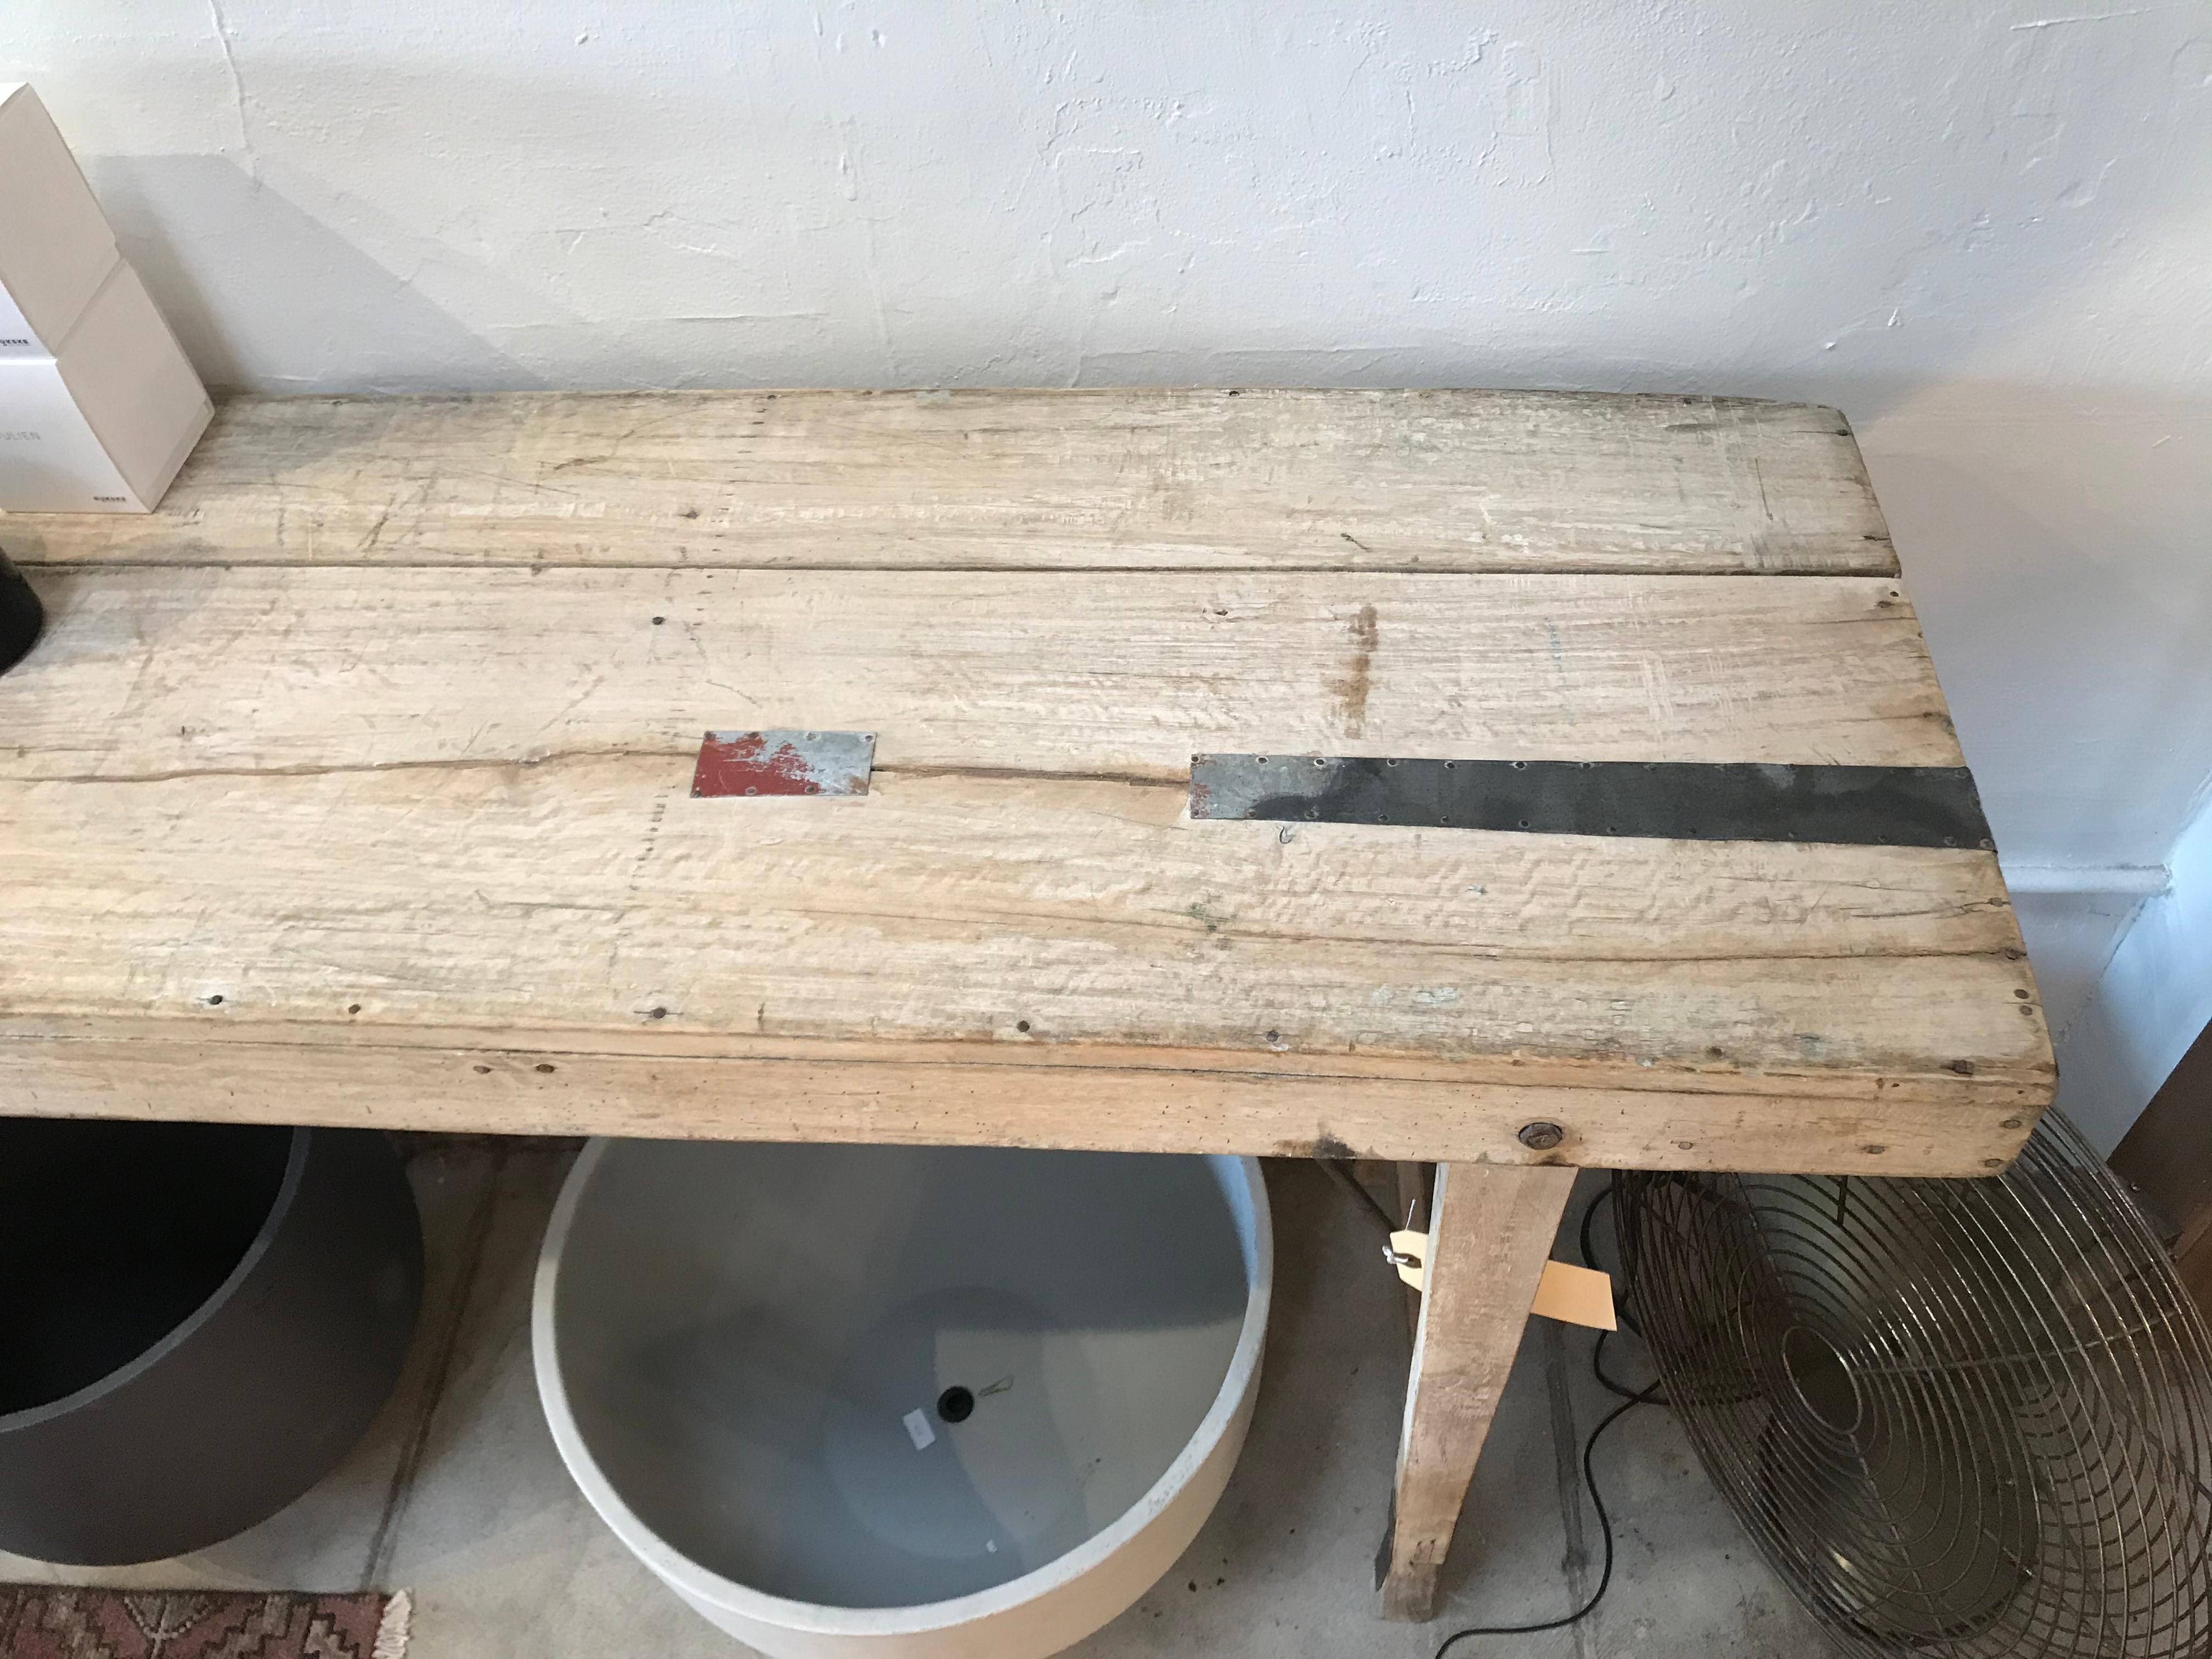 Offered is a vintage light wood Industrial style work table that is great for a entry or console table. The legs fold inward and there is a lot of Patina and beautiful wear on this old piece. There are metal patchwork accents on the top and legs of